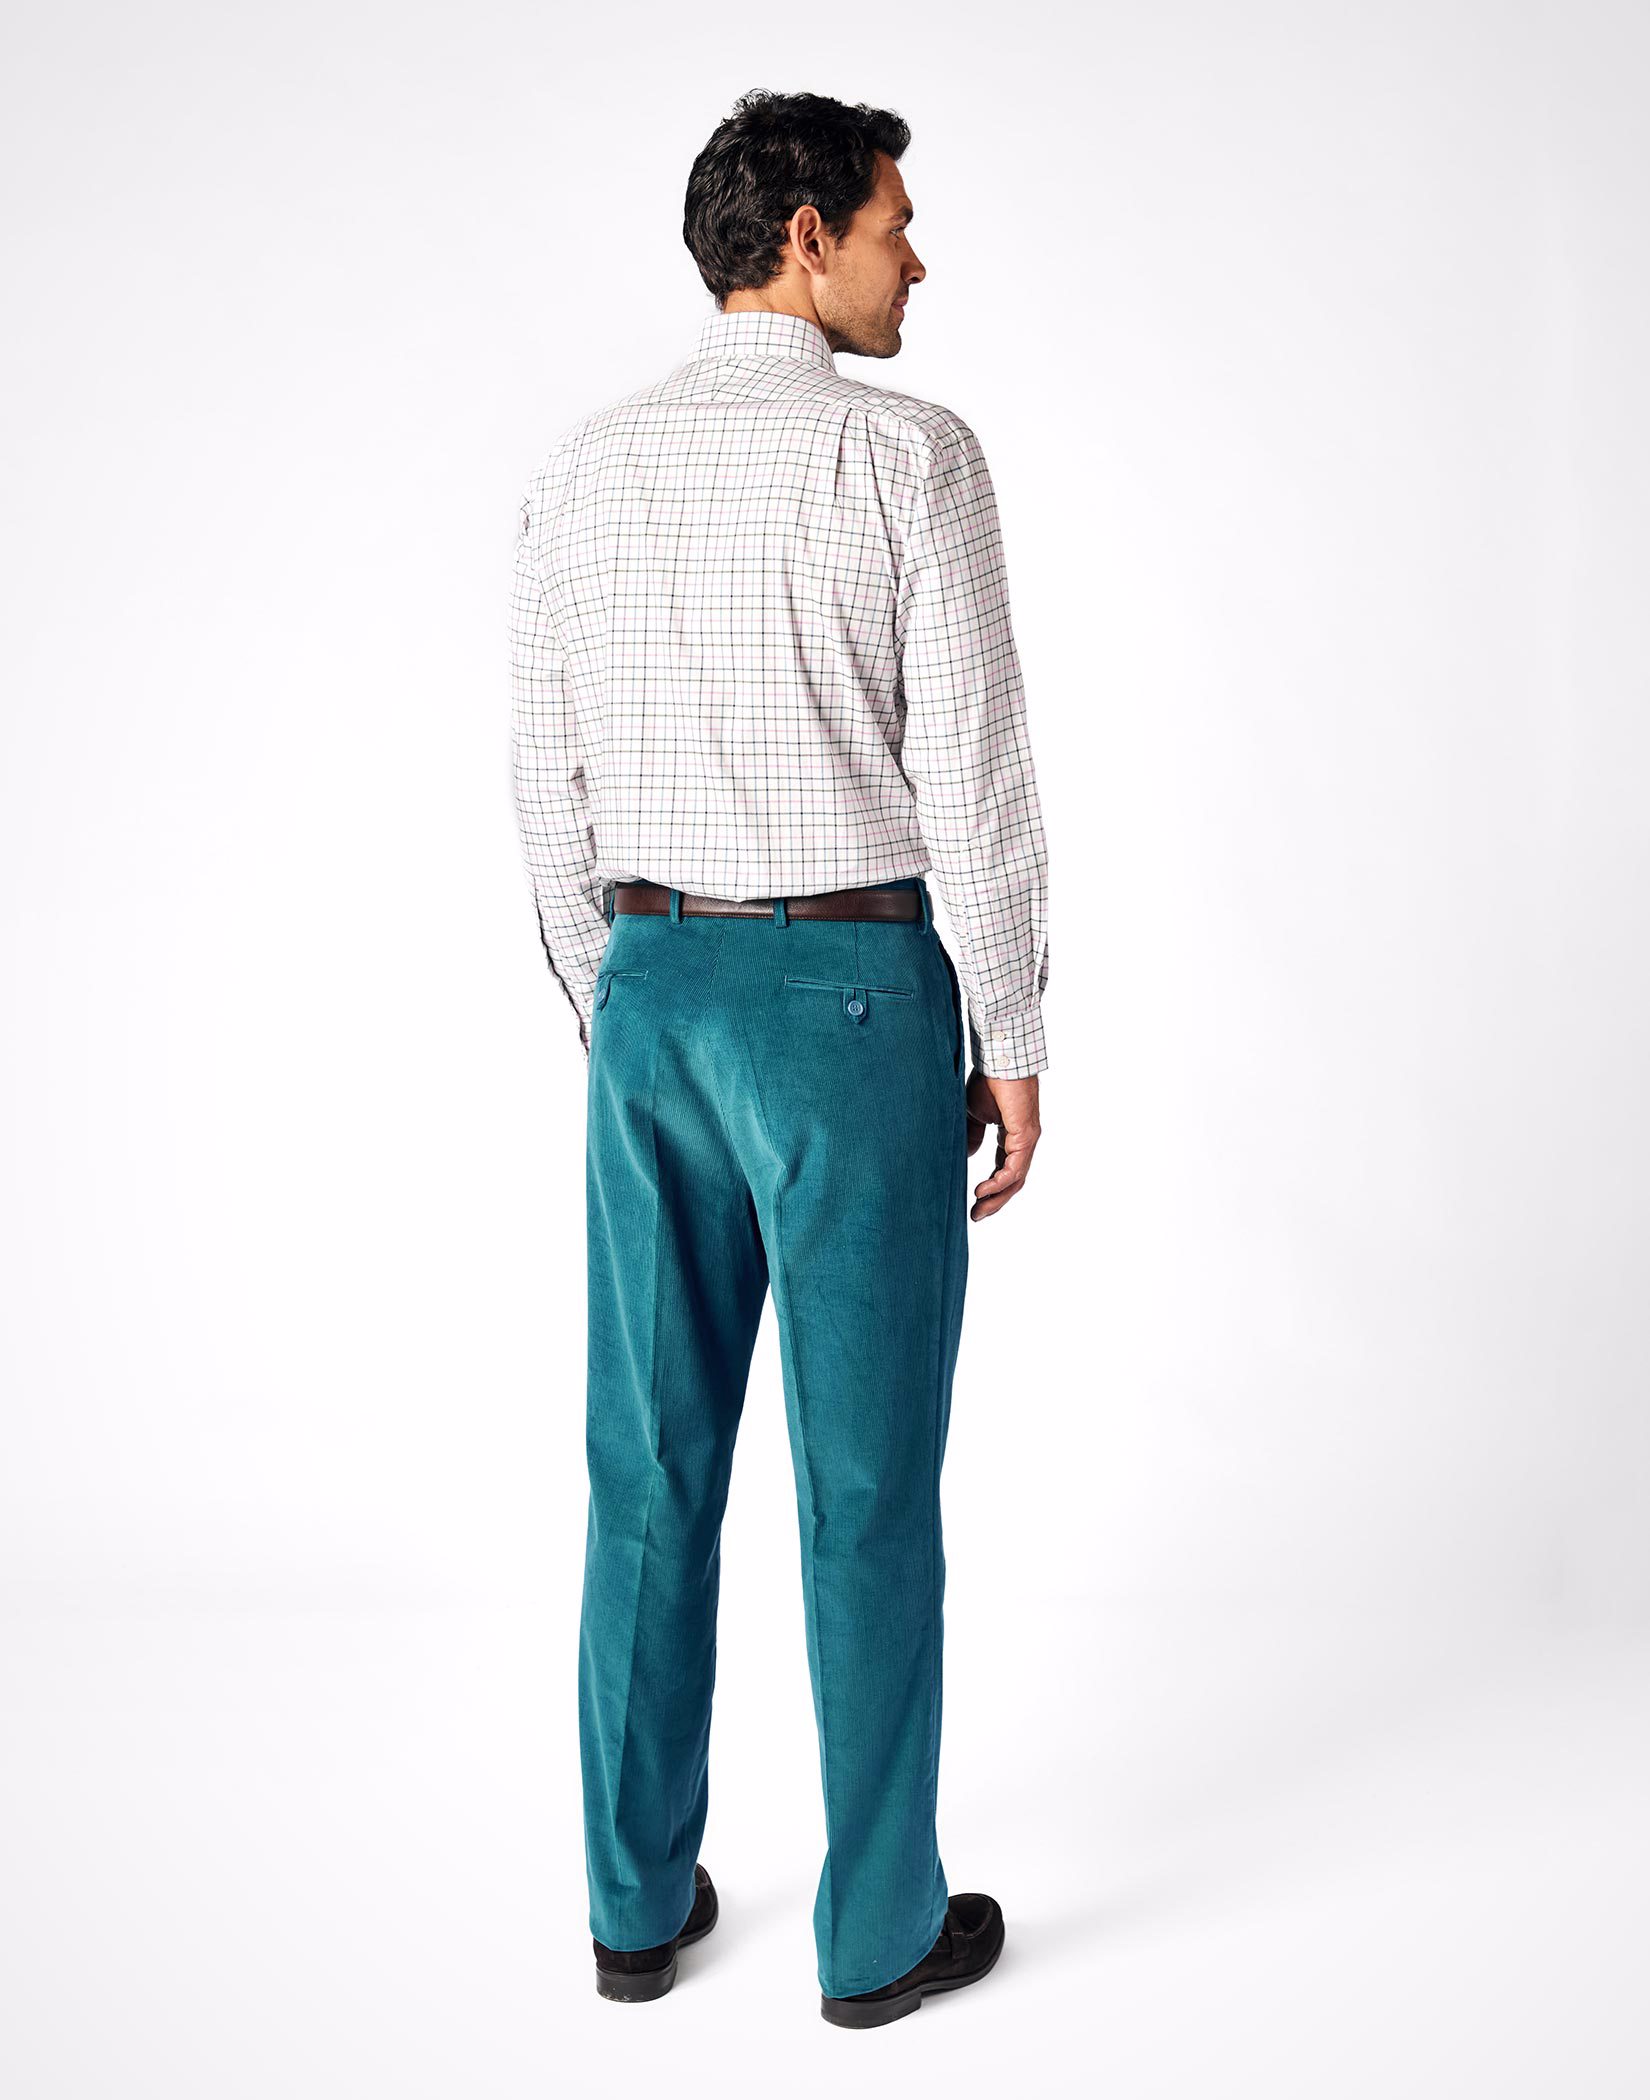 Needlecord Trousers - Teal